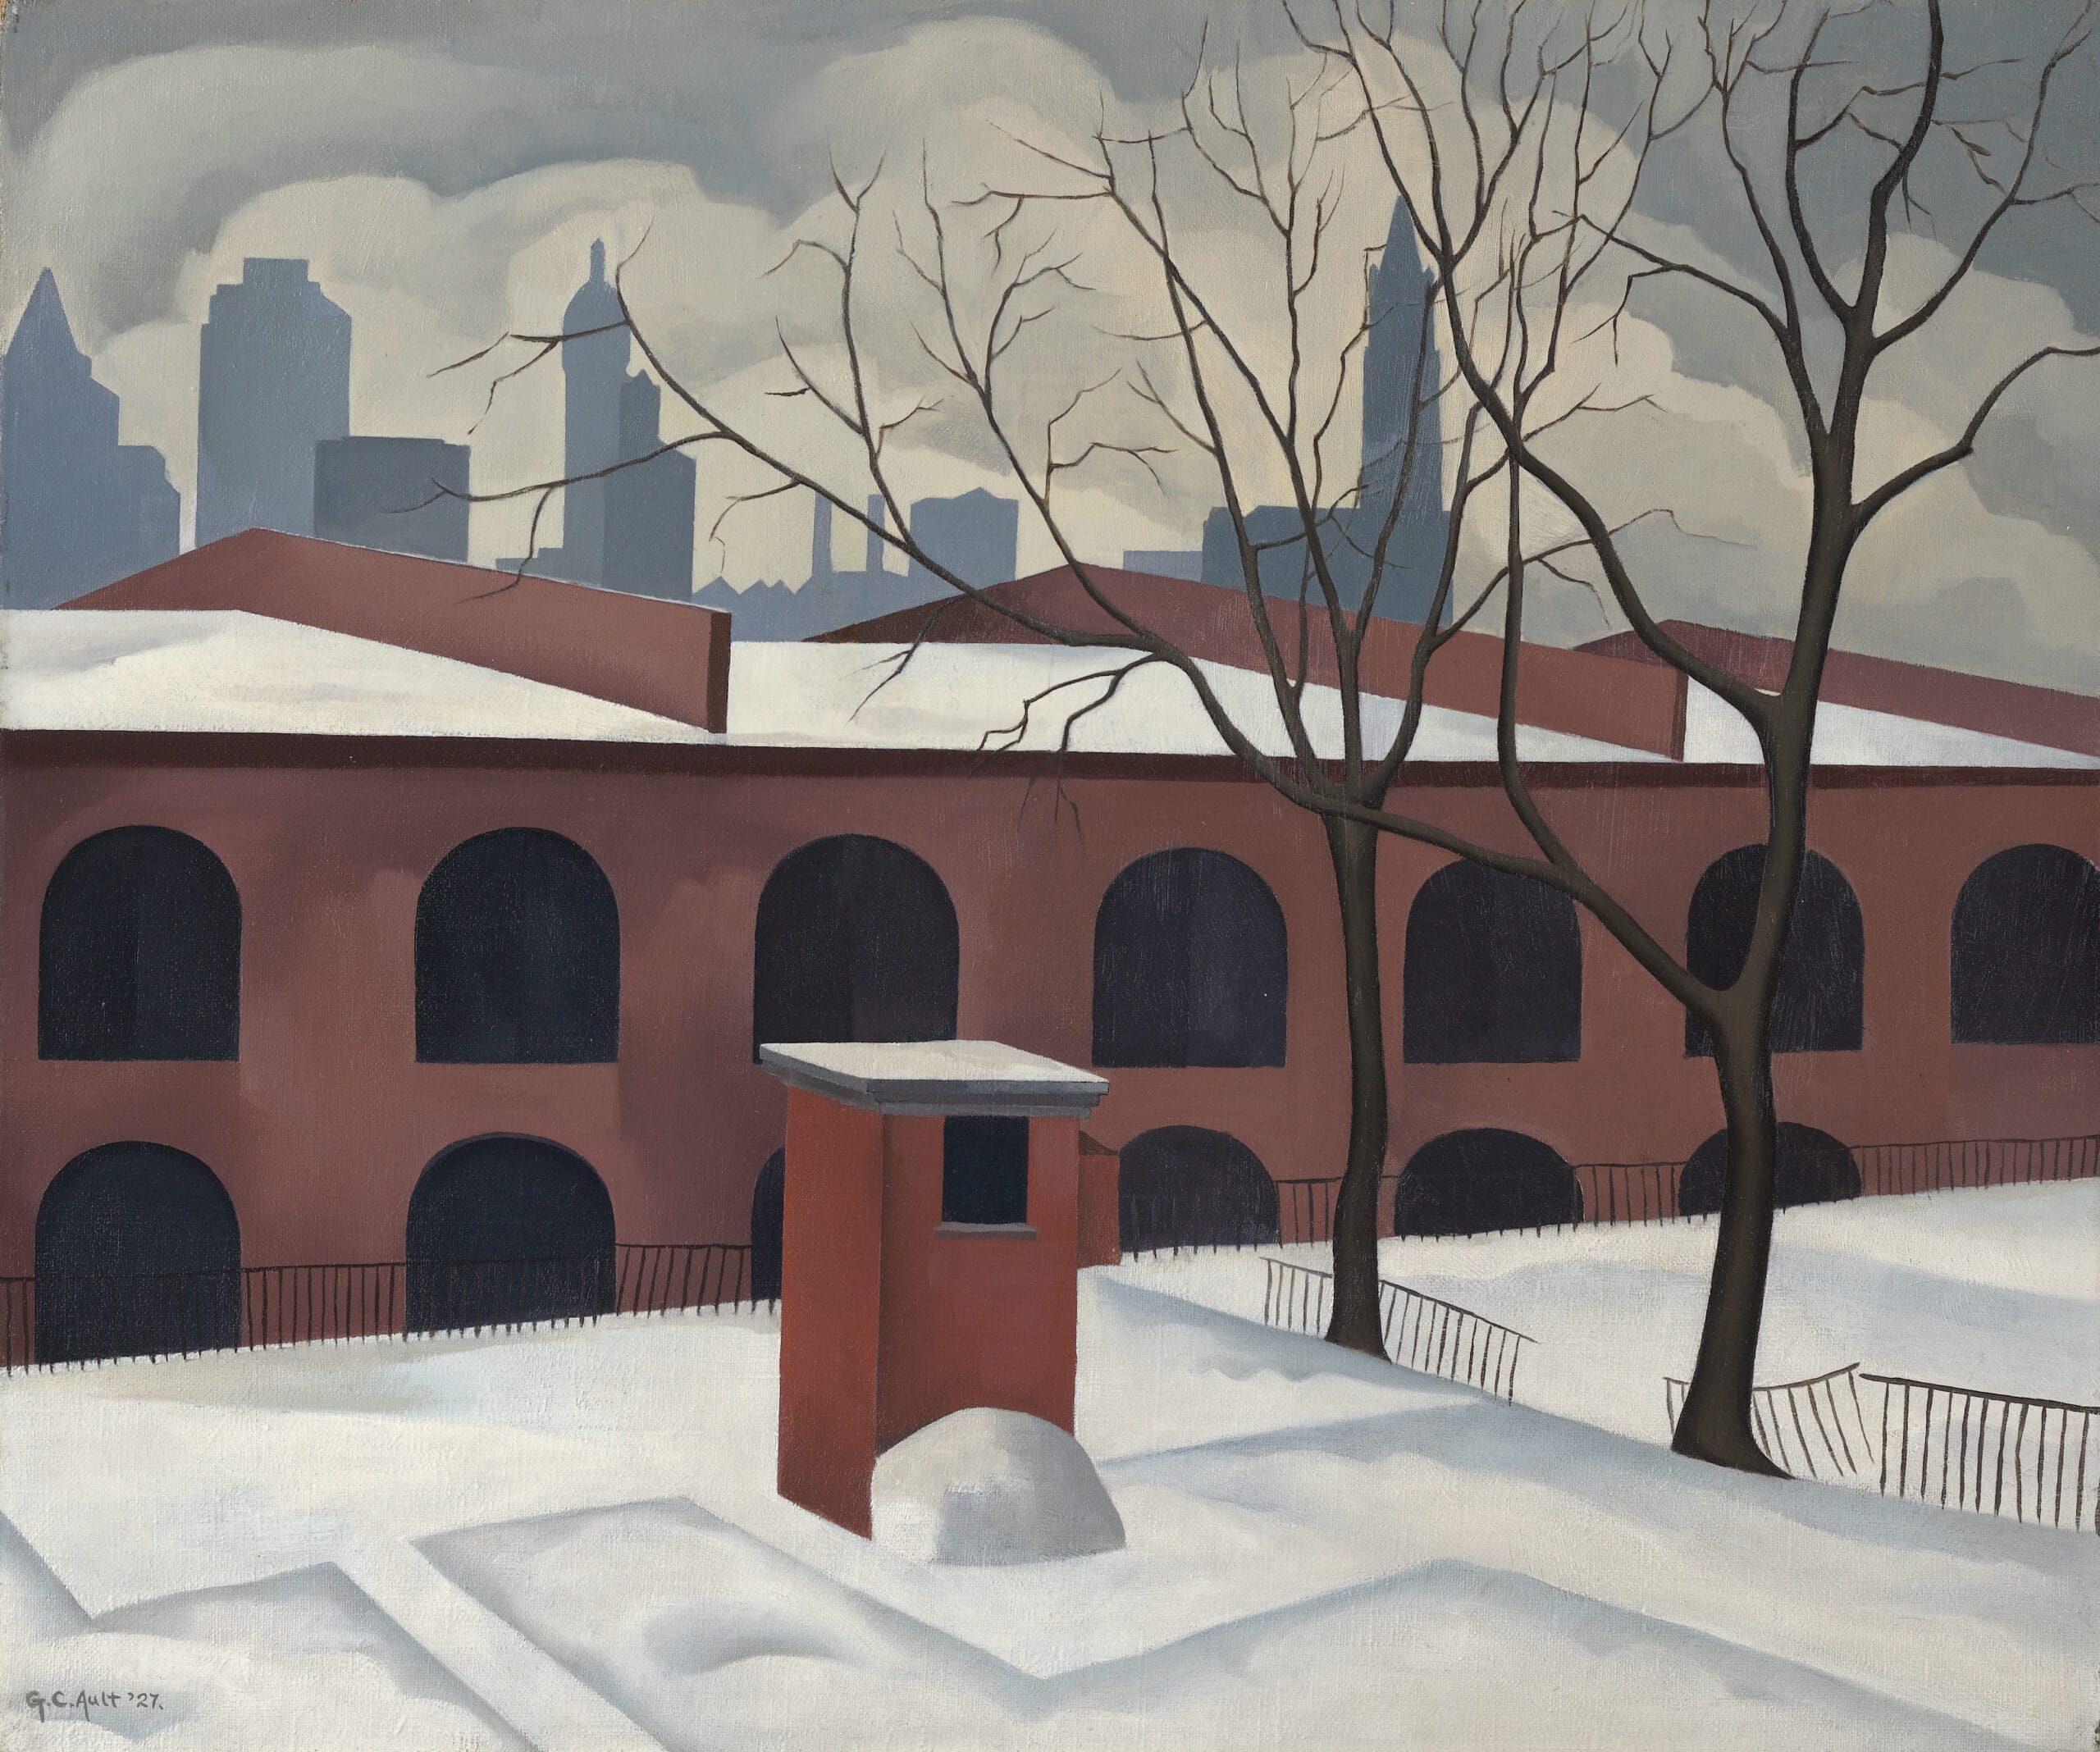 Snowy landscape in front of a wide brick building with rows of black arched windows, with the New York skyline in silhouette against a cloudy sky.